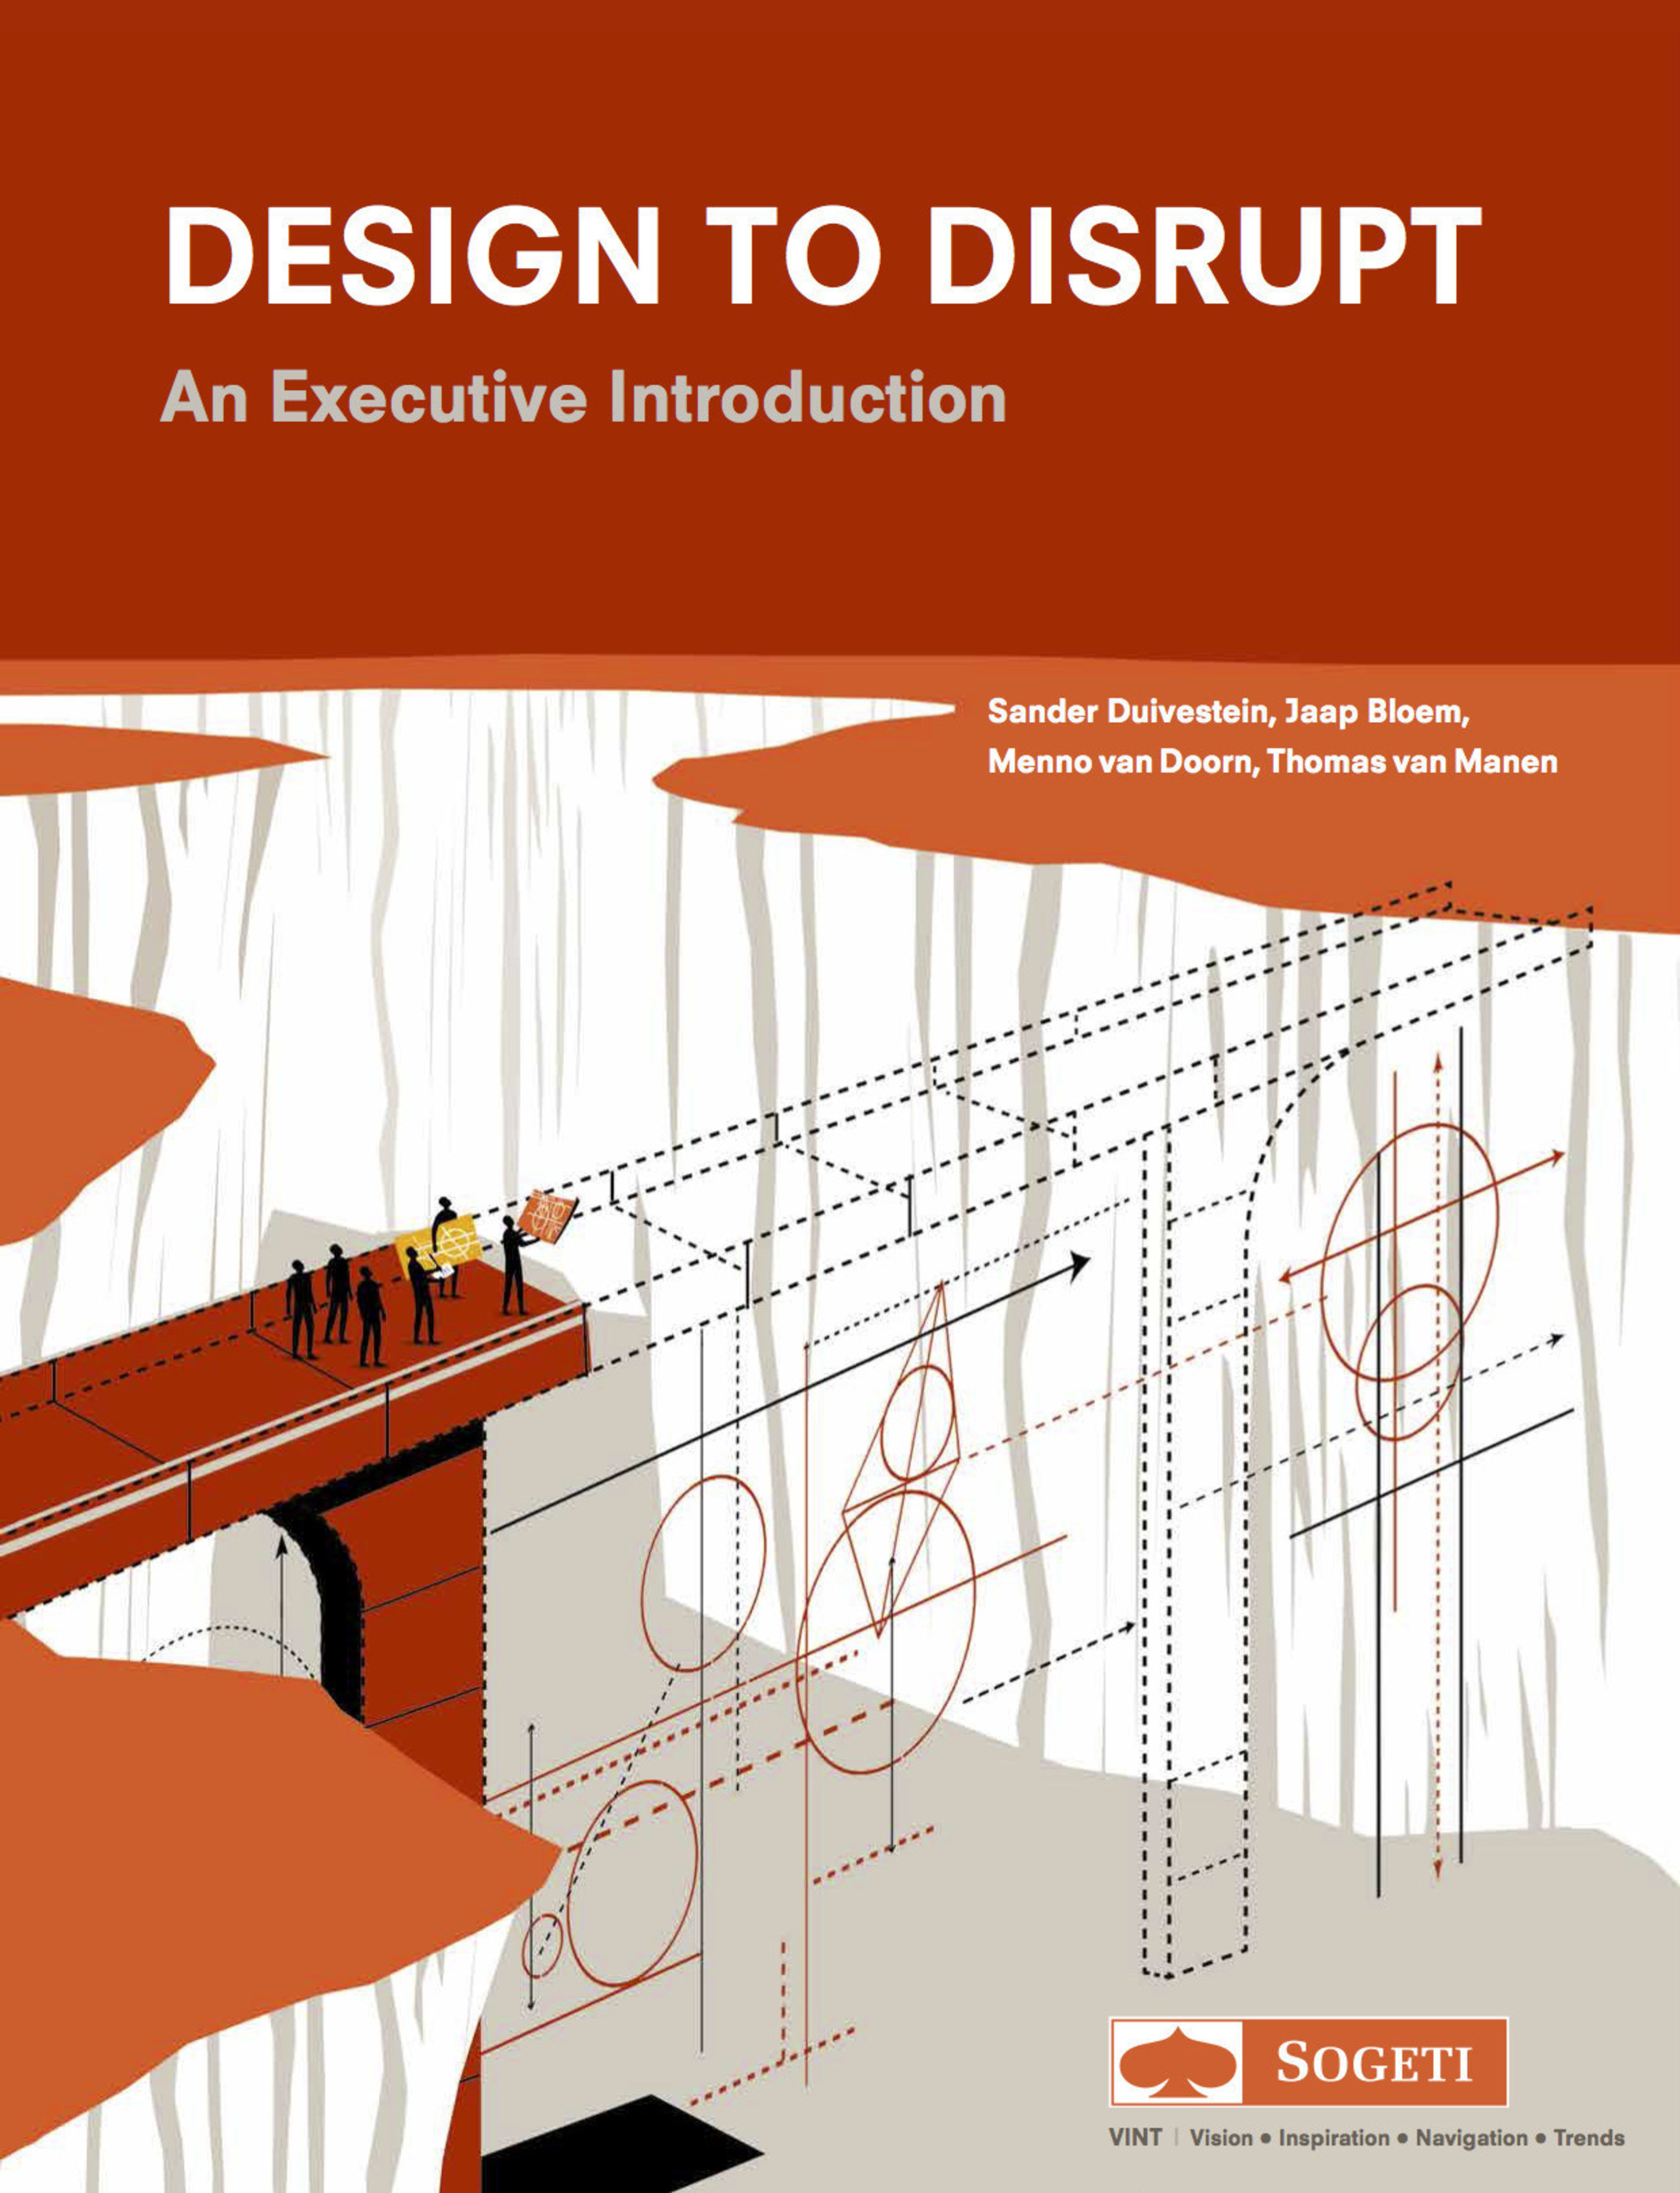 Disruption is triggered by advances in Social, Mobile, Analytics, Cloud and smart 'Things' (SMACT). "Design to Disrupt" marks the start of a new research project examining how customers are changing their behavior in response and what organizations should do to thrive in the face of this change.